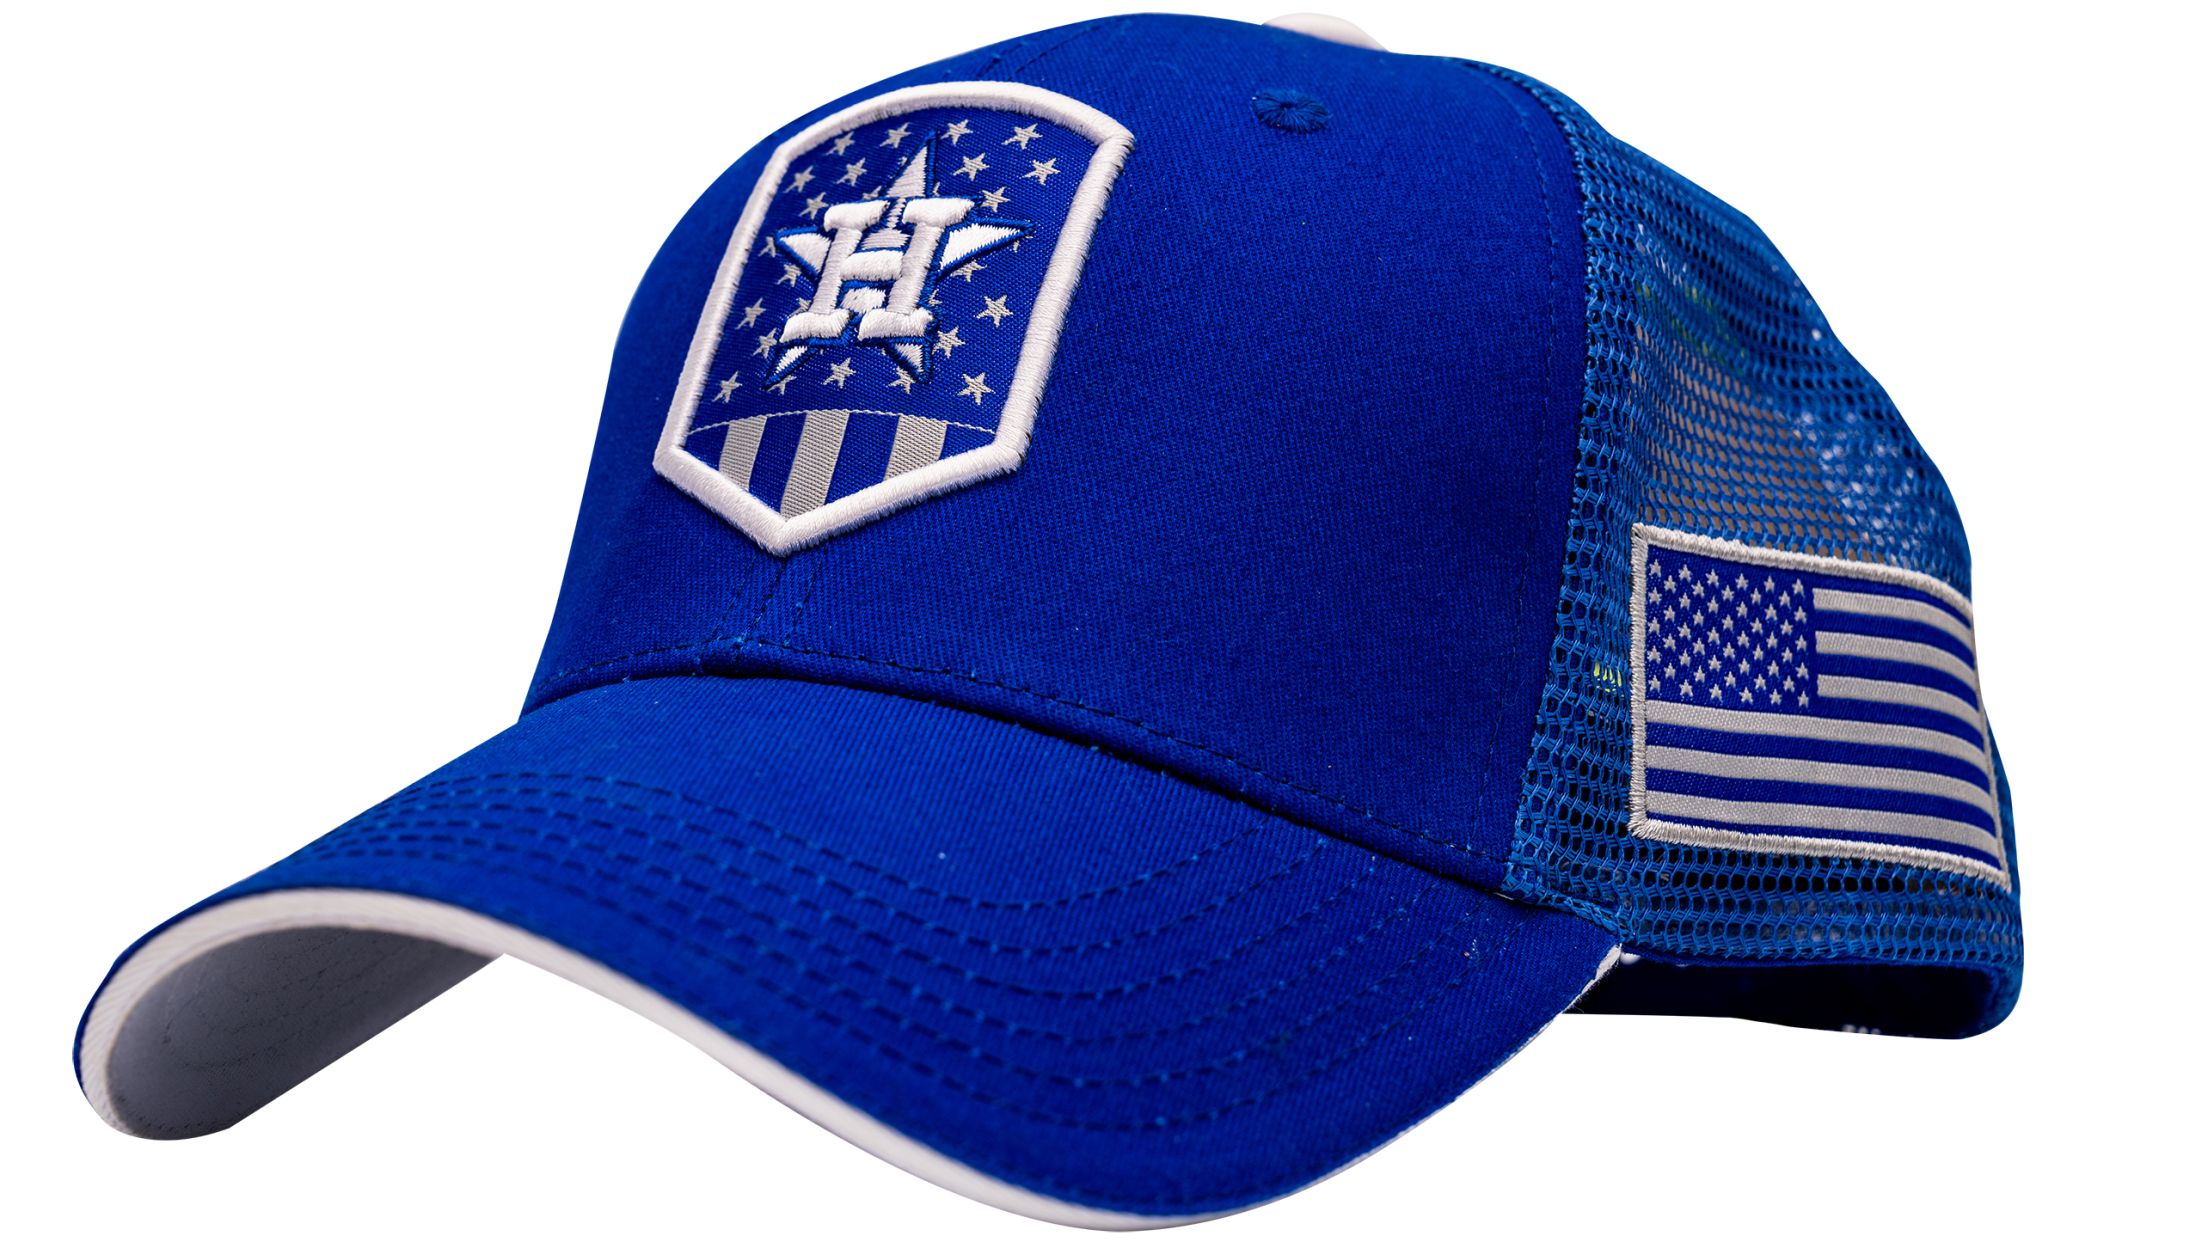 MLB Armed Forces Day 2023 hats are available now: Where to buy on